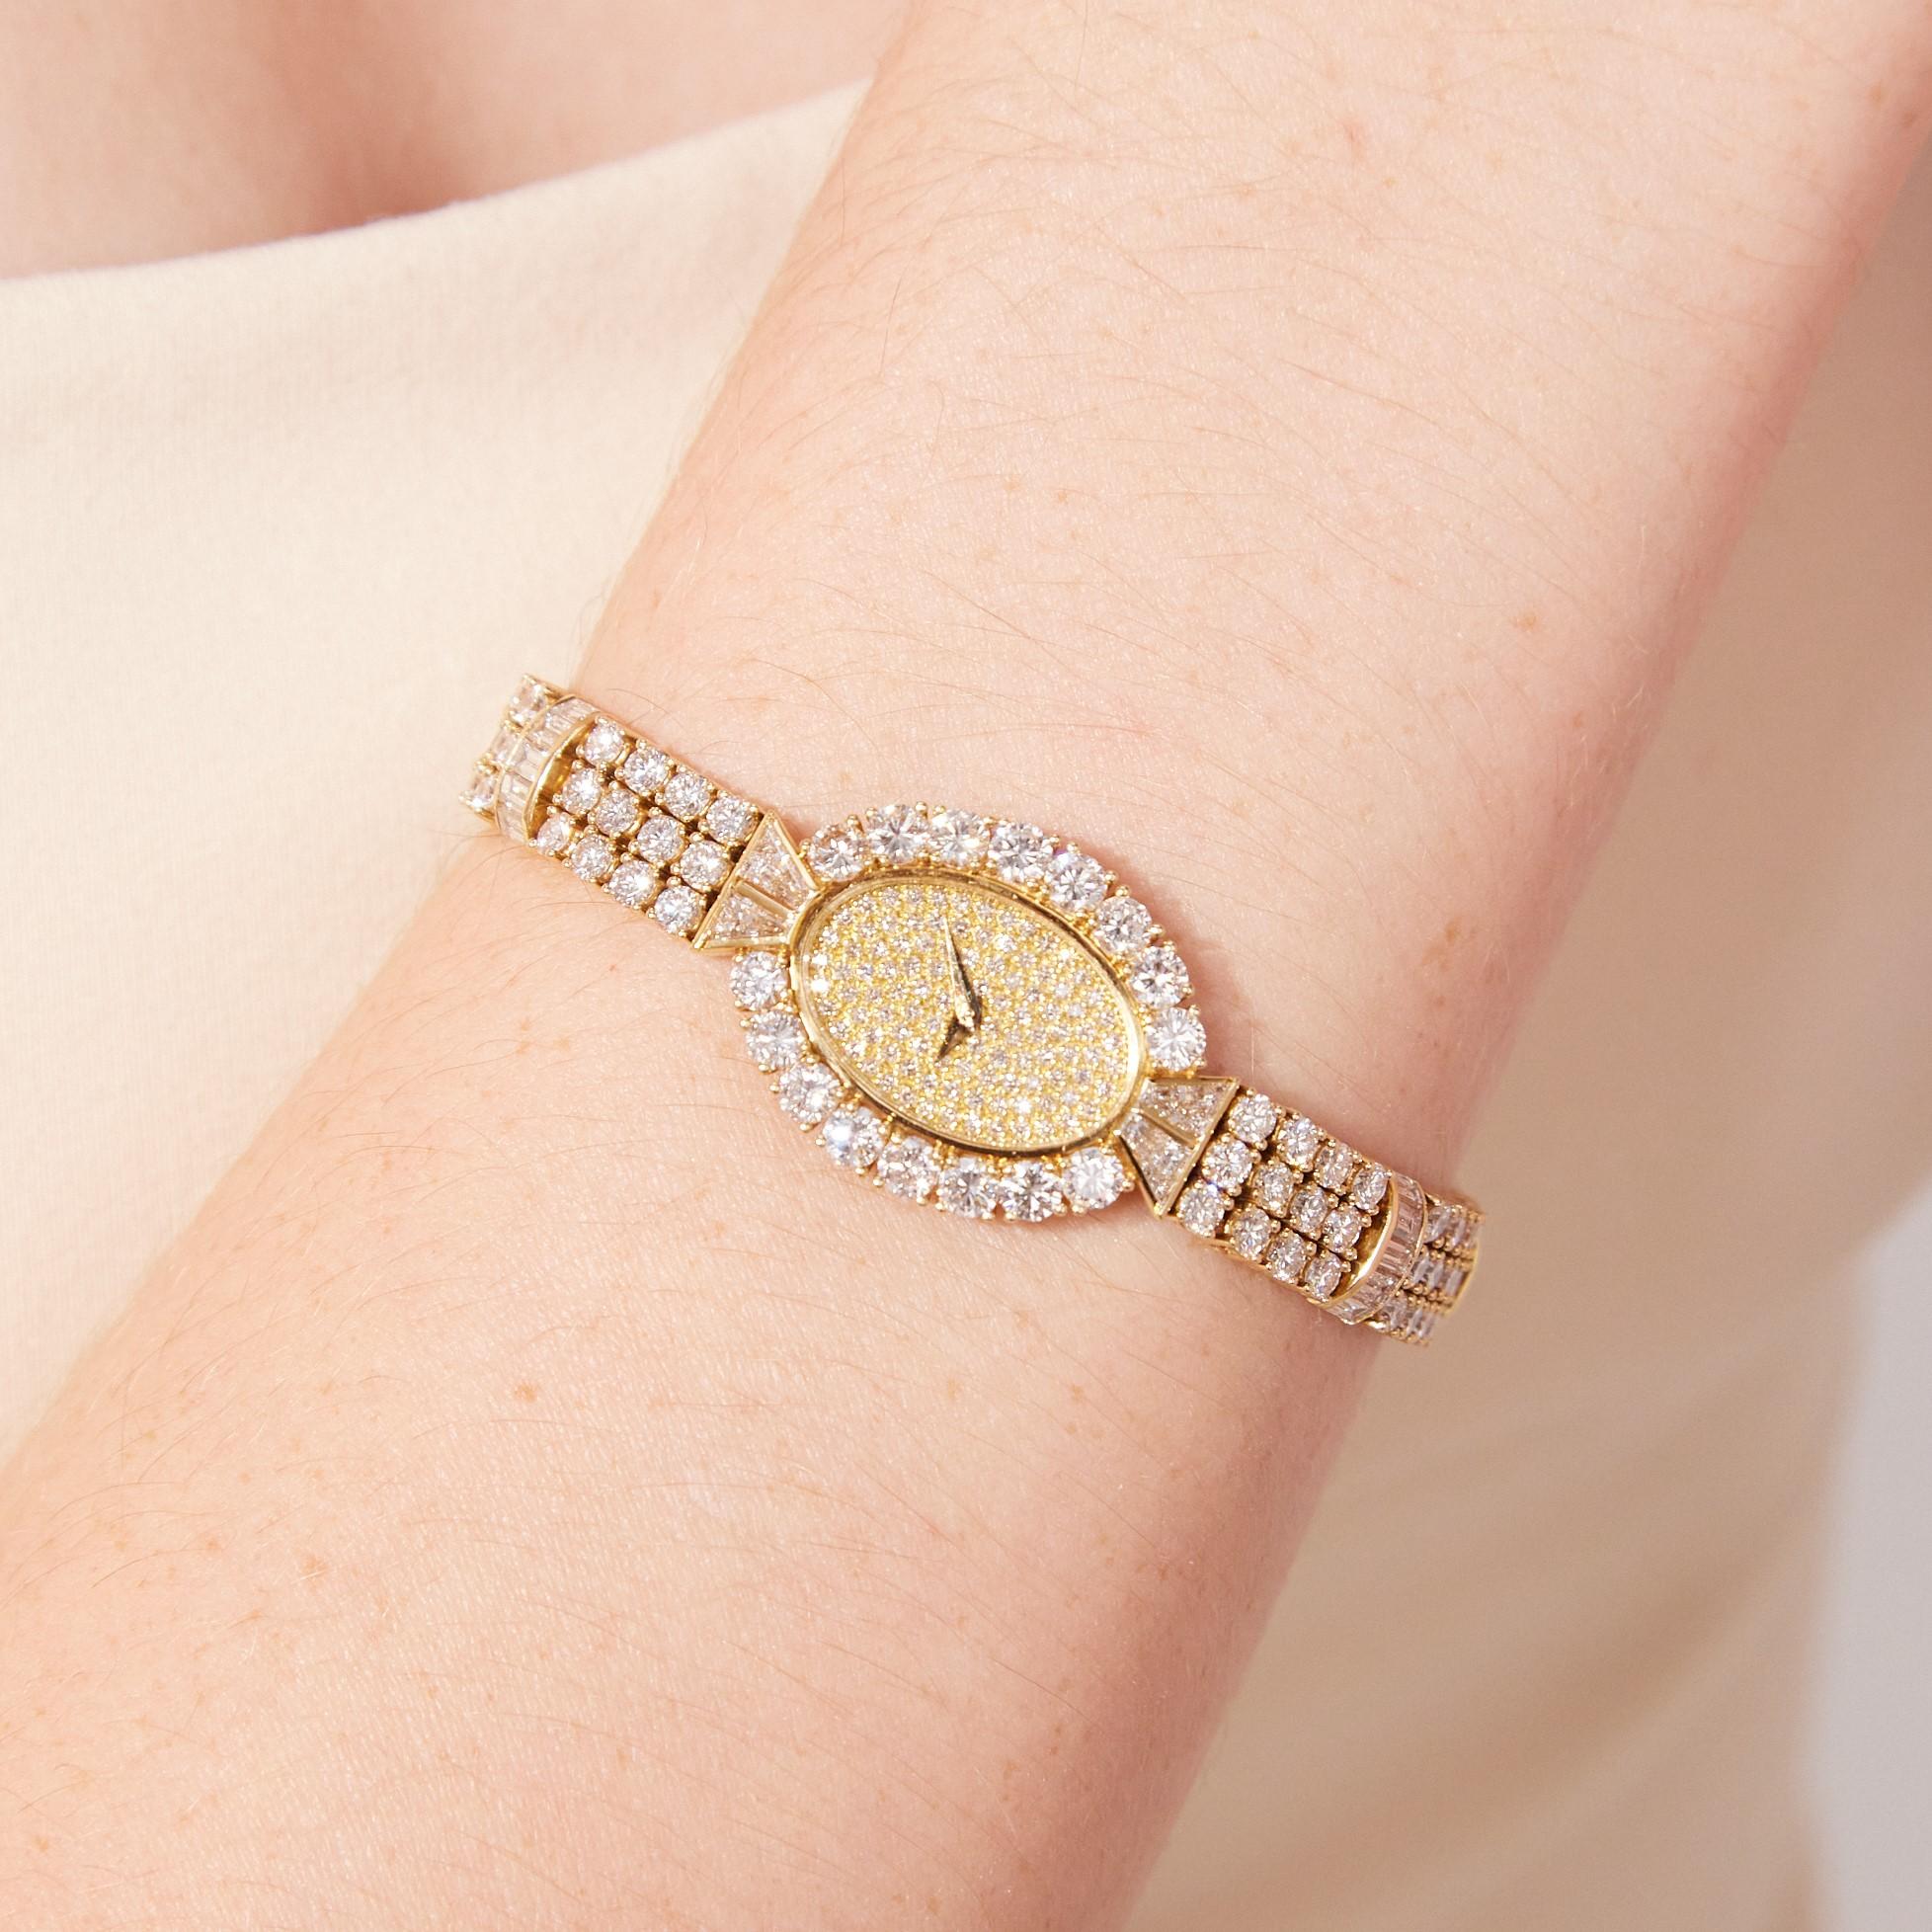 Superb Vacheron Constantin Geneve ladies diamond wristwatch is a very fine and rare piece from Switzerland’s oldest and one of the most esteemed watchmakers. The watch features approximately 14 carats of spectacularly bright white diamonds